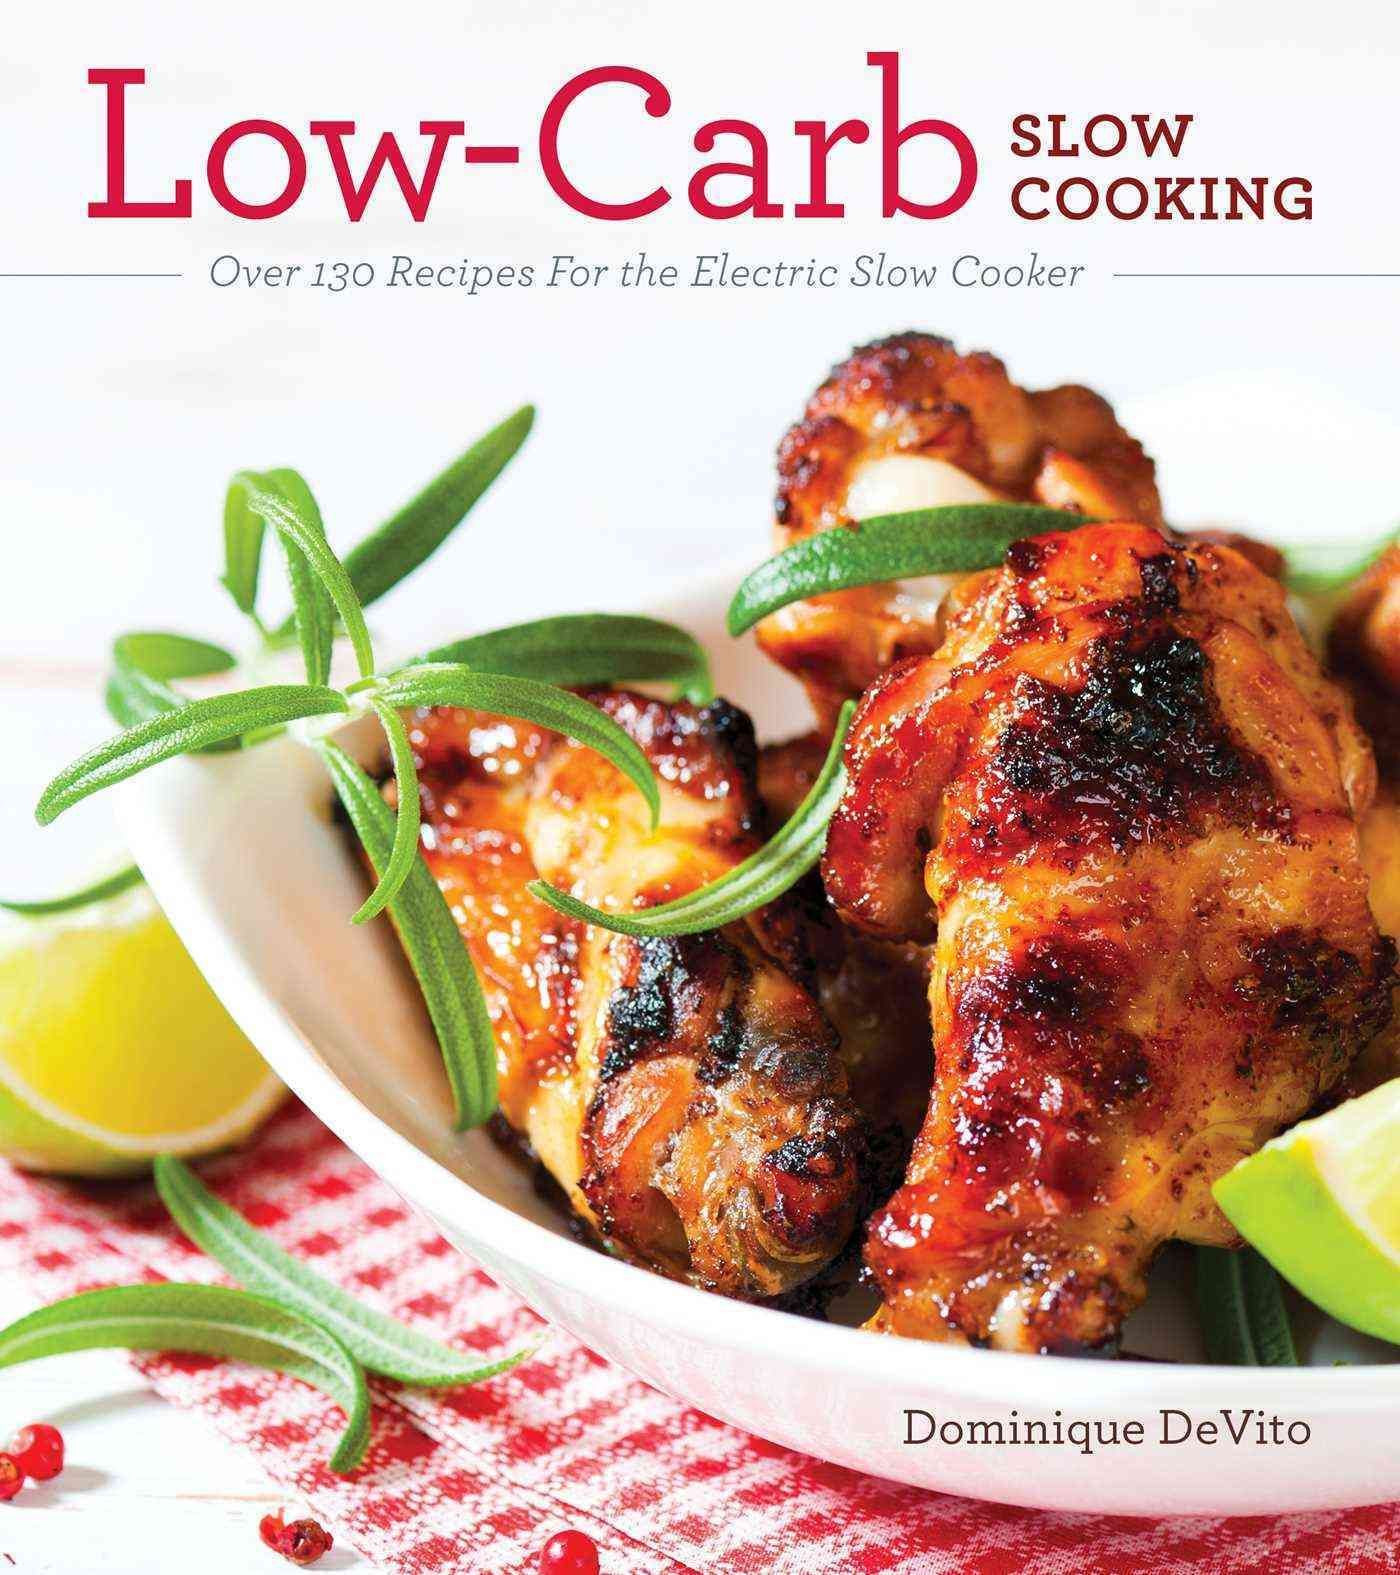 Slow Cooker Chicken Wings Food Network
 Low carb Slow Cooking Over 150 Recipes for the Electric